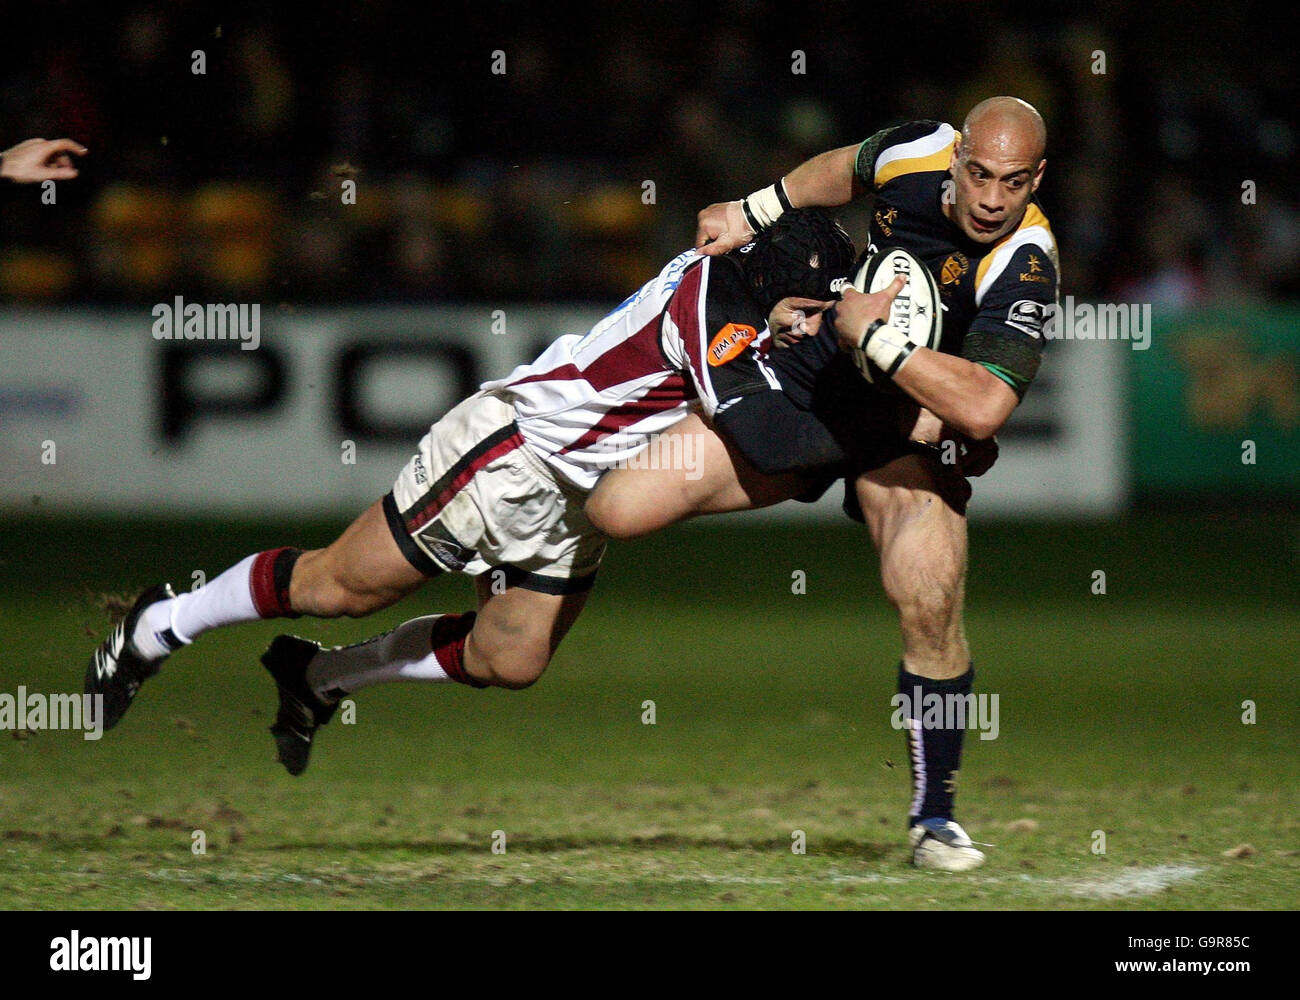 Rugby Union - Guinness Premiership - Worcester Warriors v Newcastle Falcons - Sixways Stadium. Worcester's Dale Rasmussen is tackled by Newcastle's Mark Mayerhofler during the Guinness Premiership match at Sixways Stadium, Worcester. Stock Photo